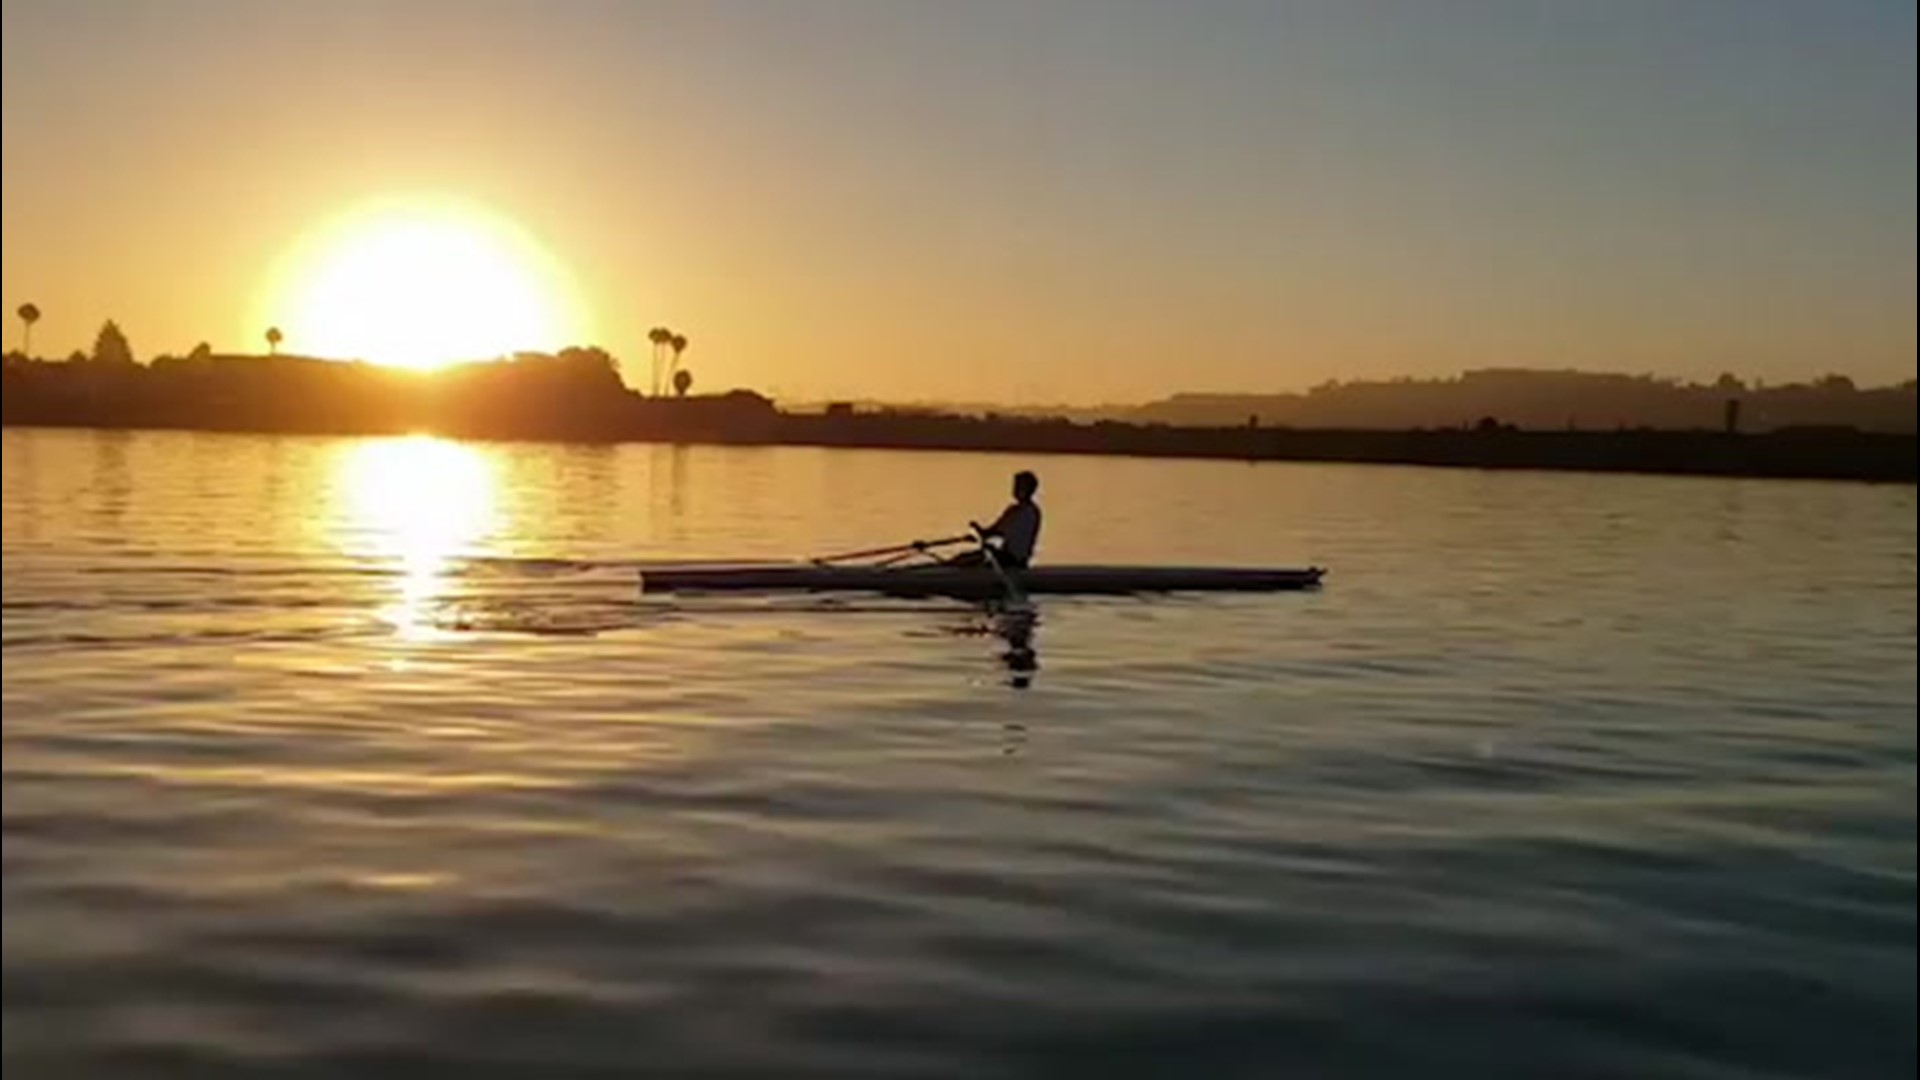 This was a perfect morning to go rowing on a boat in this lake south of Santa Monica, California, on July 31.